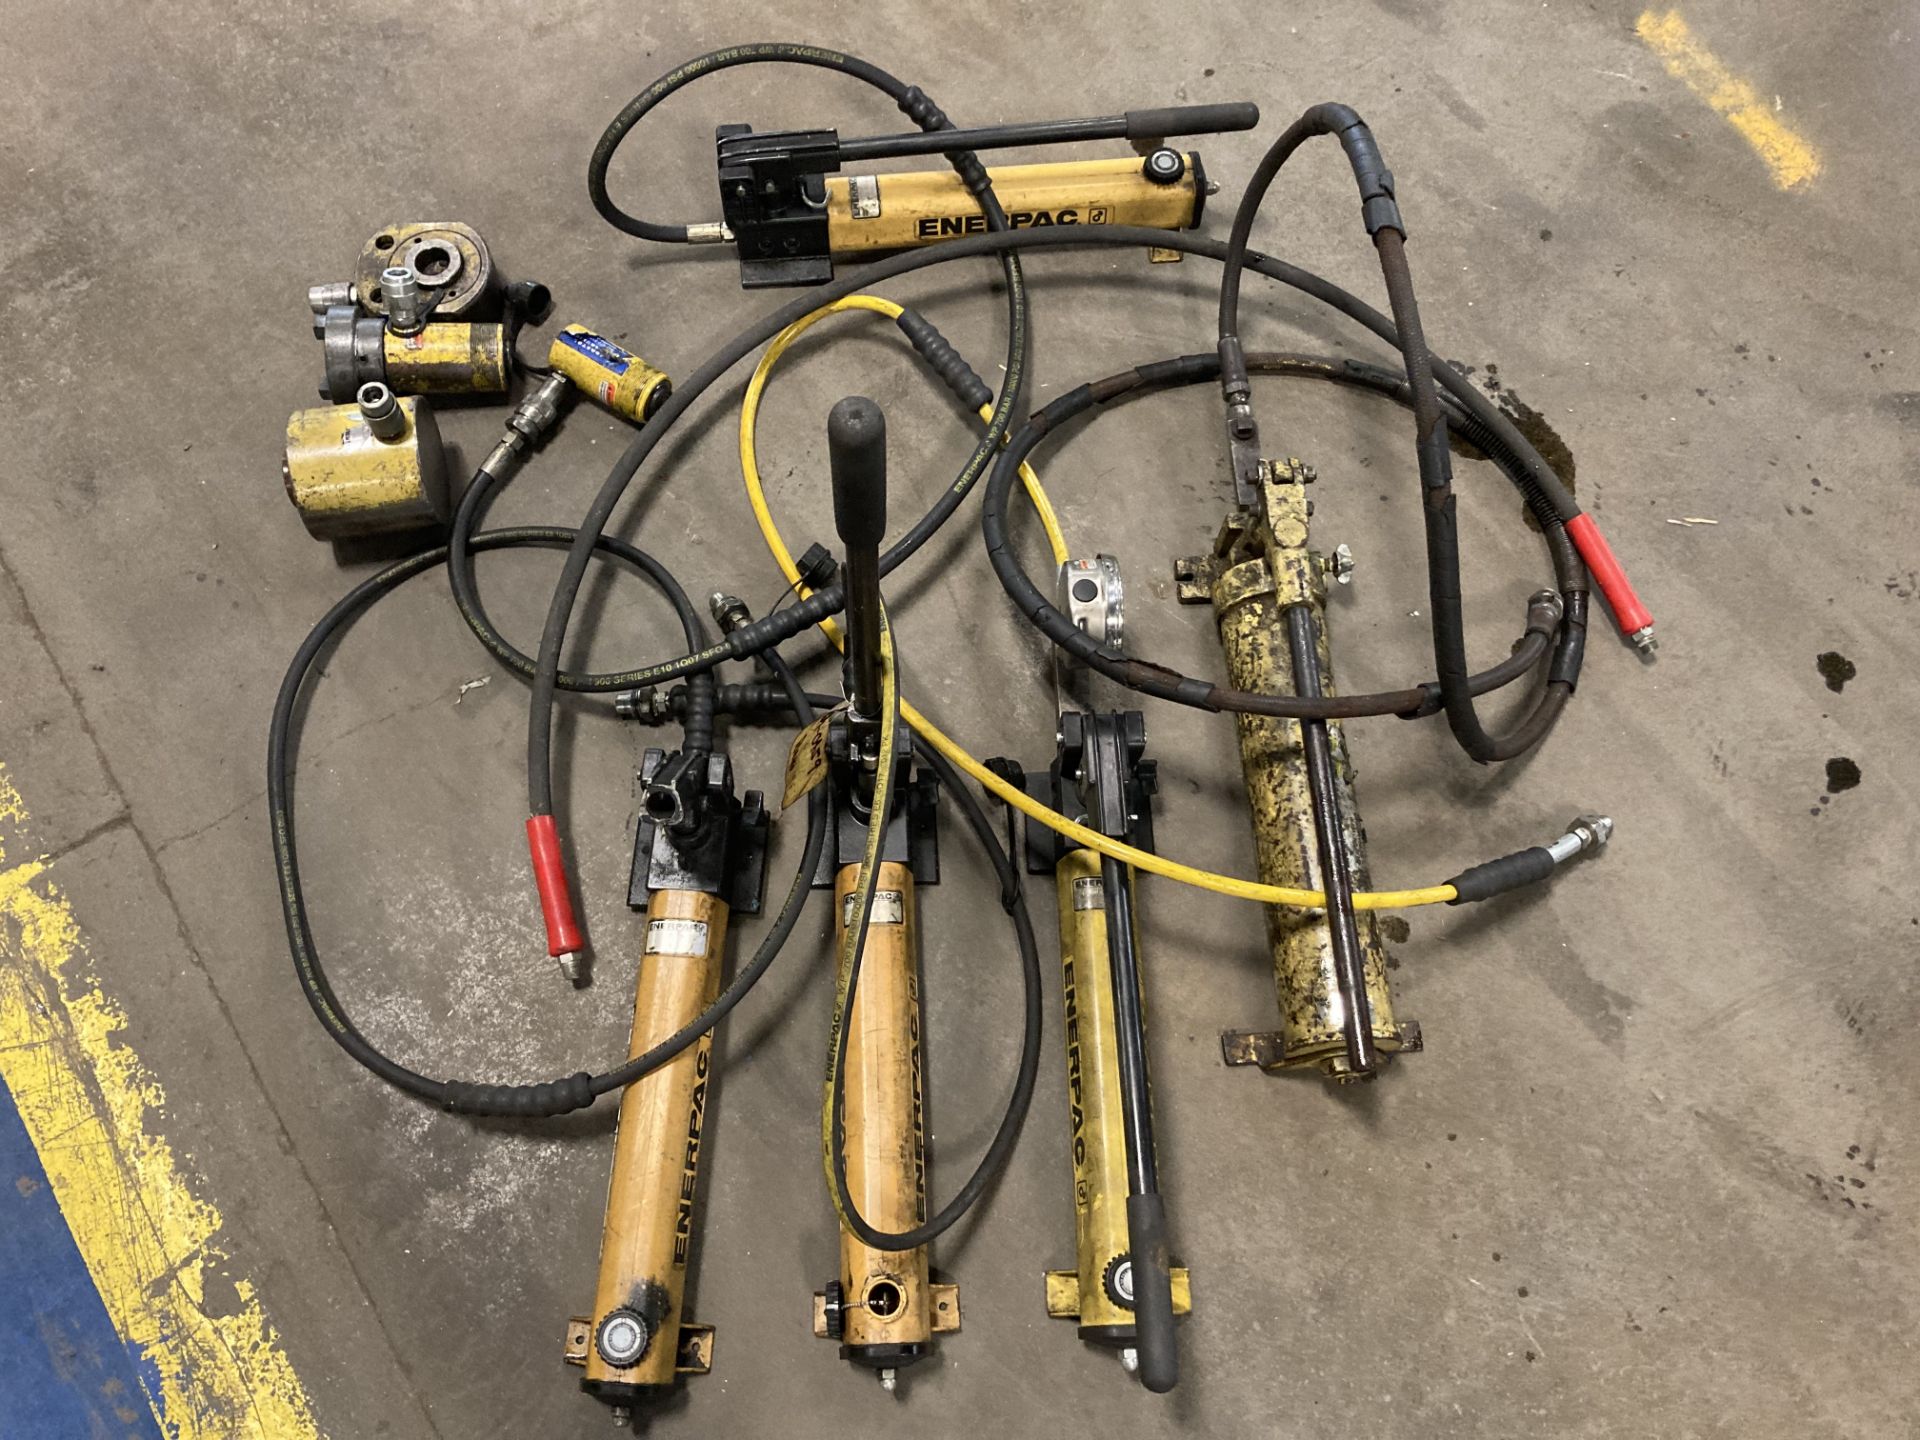 Lot of (5) Enerpac Porta Power Hydraulic Hand Pumps - Image 5 of 8